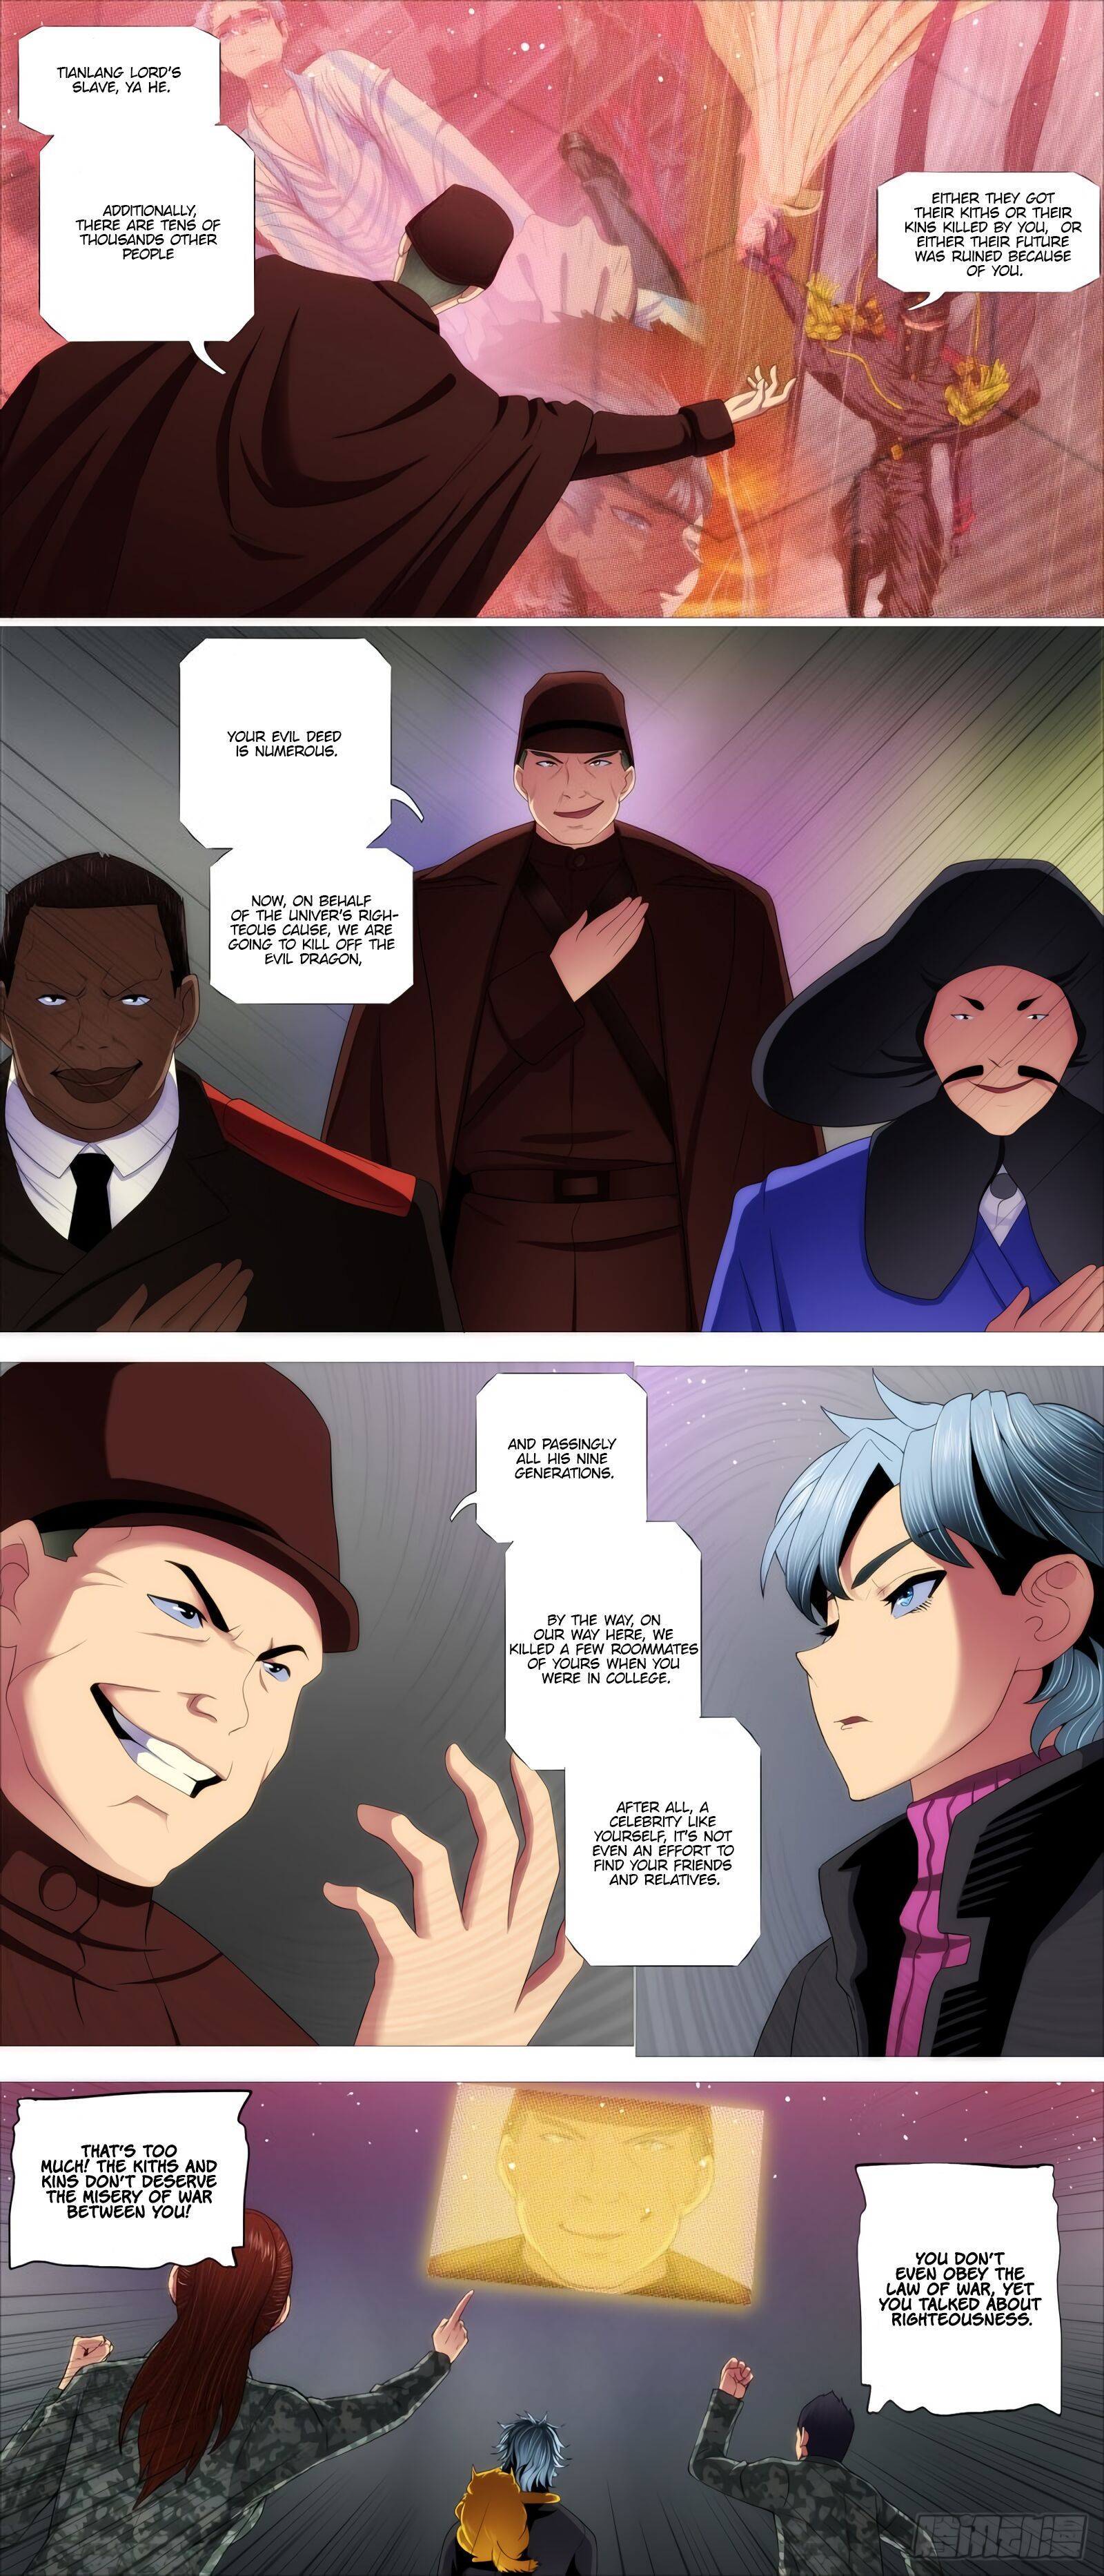 Iron Ladies Chapter 412 Page 2